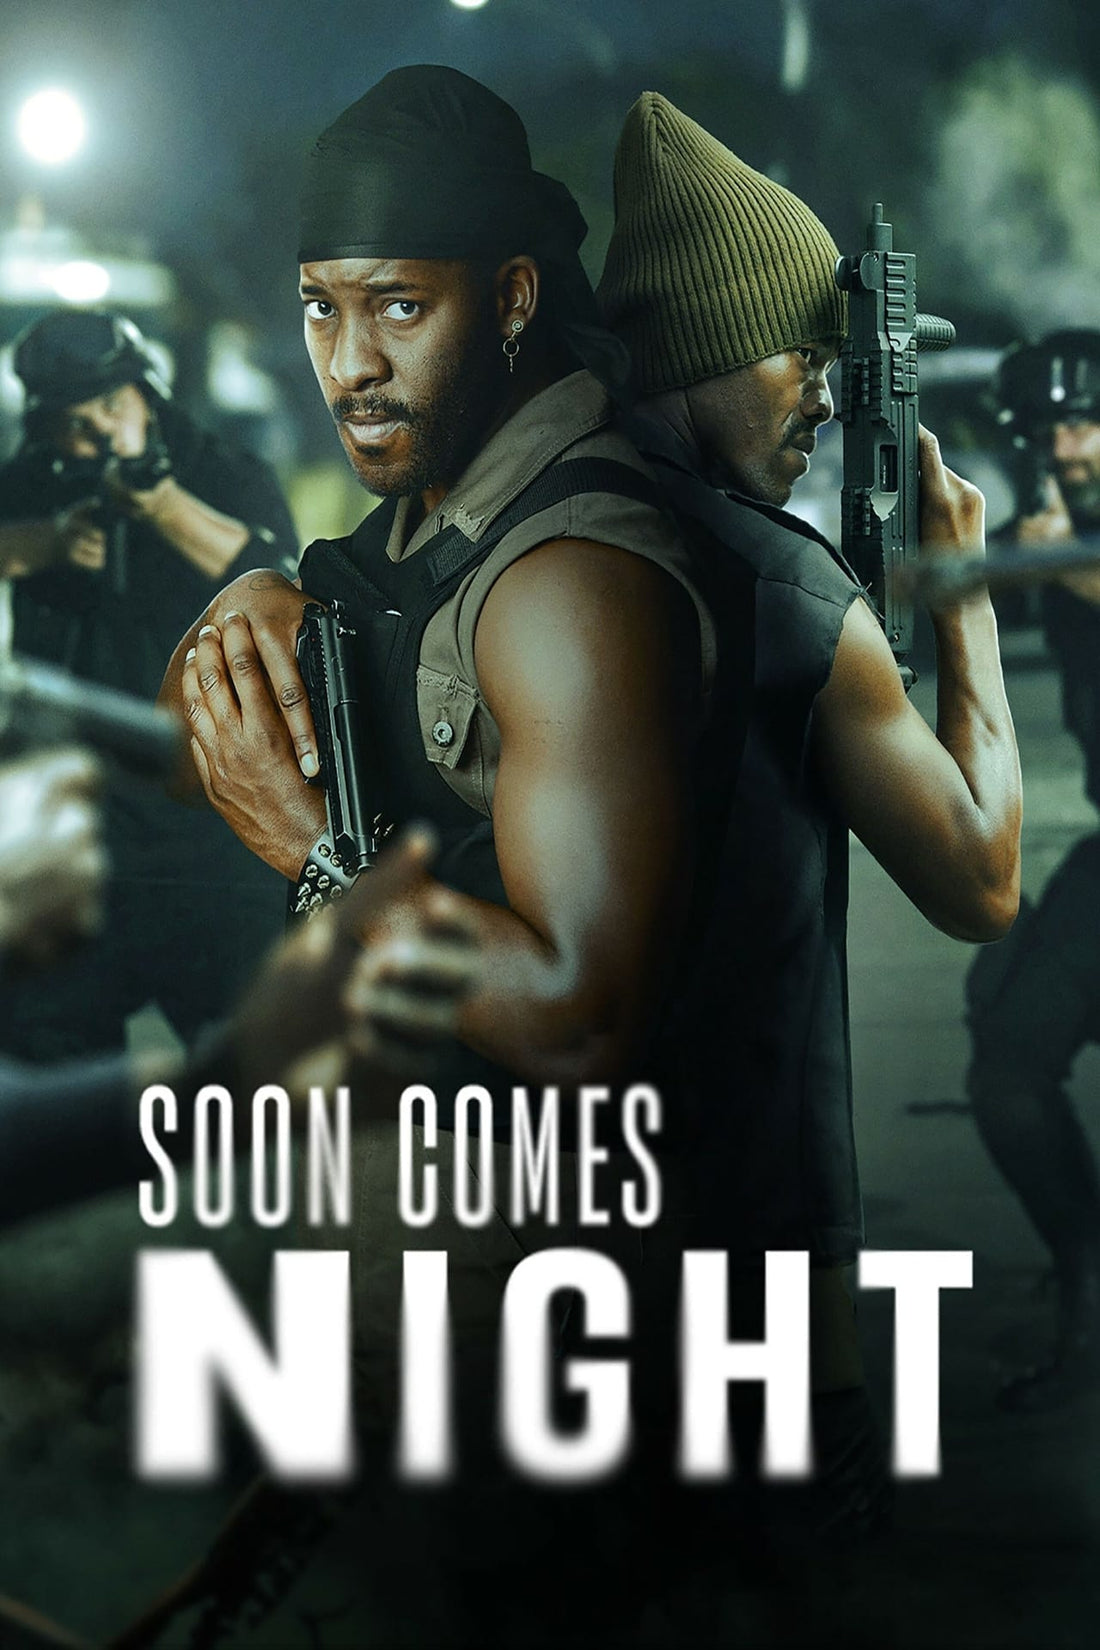 Where to watch Soon Comes Night Black TV Show